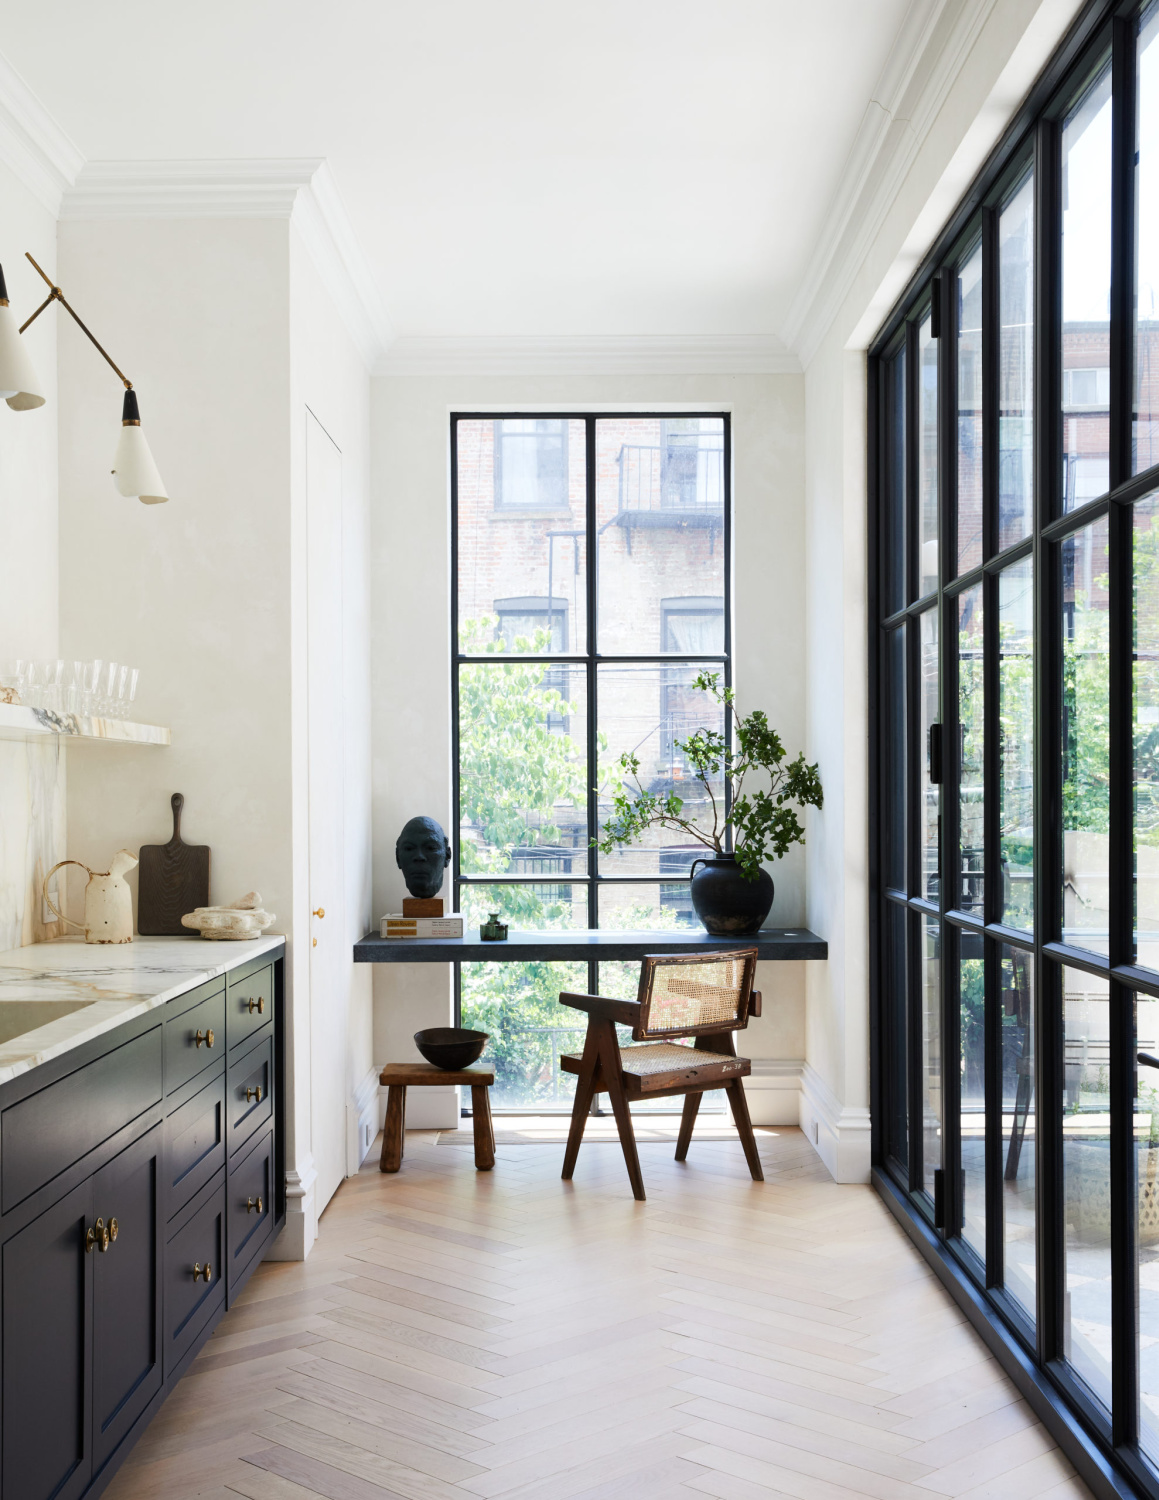 Athena Calderone Brooklyn kitchen with Farrow & Ball Railings blue black cabinets, marble, and floating desk in front of window. #blackkitchens #blackandwhite #inteiordesign